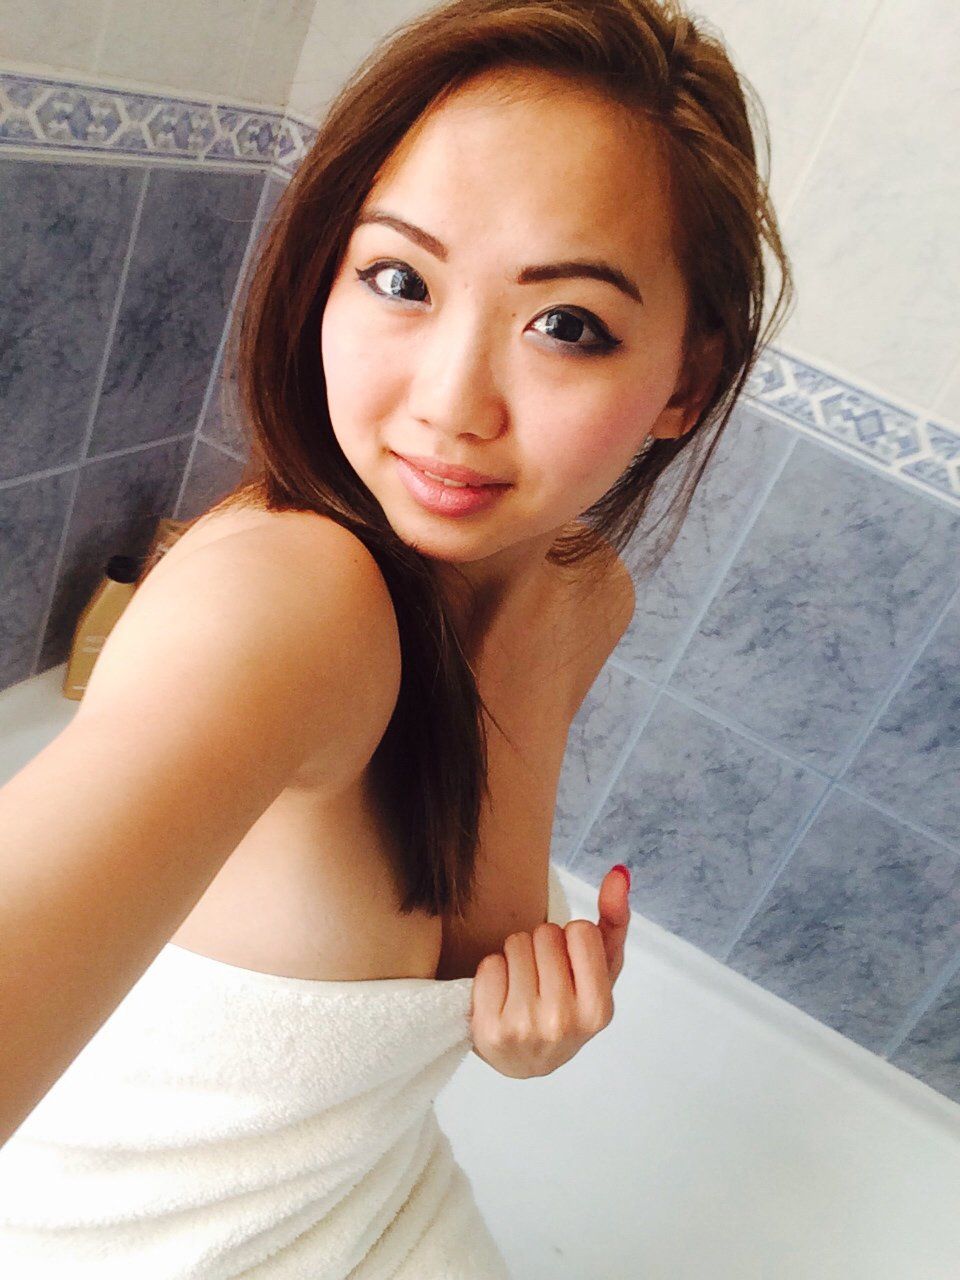 Neptune recommend best of the girls naked asian showers in